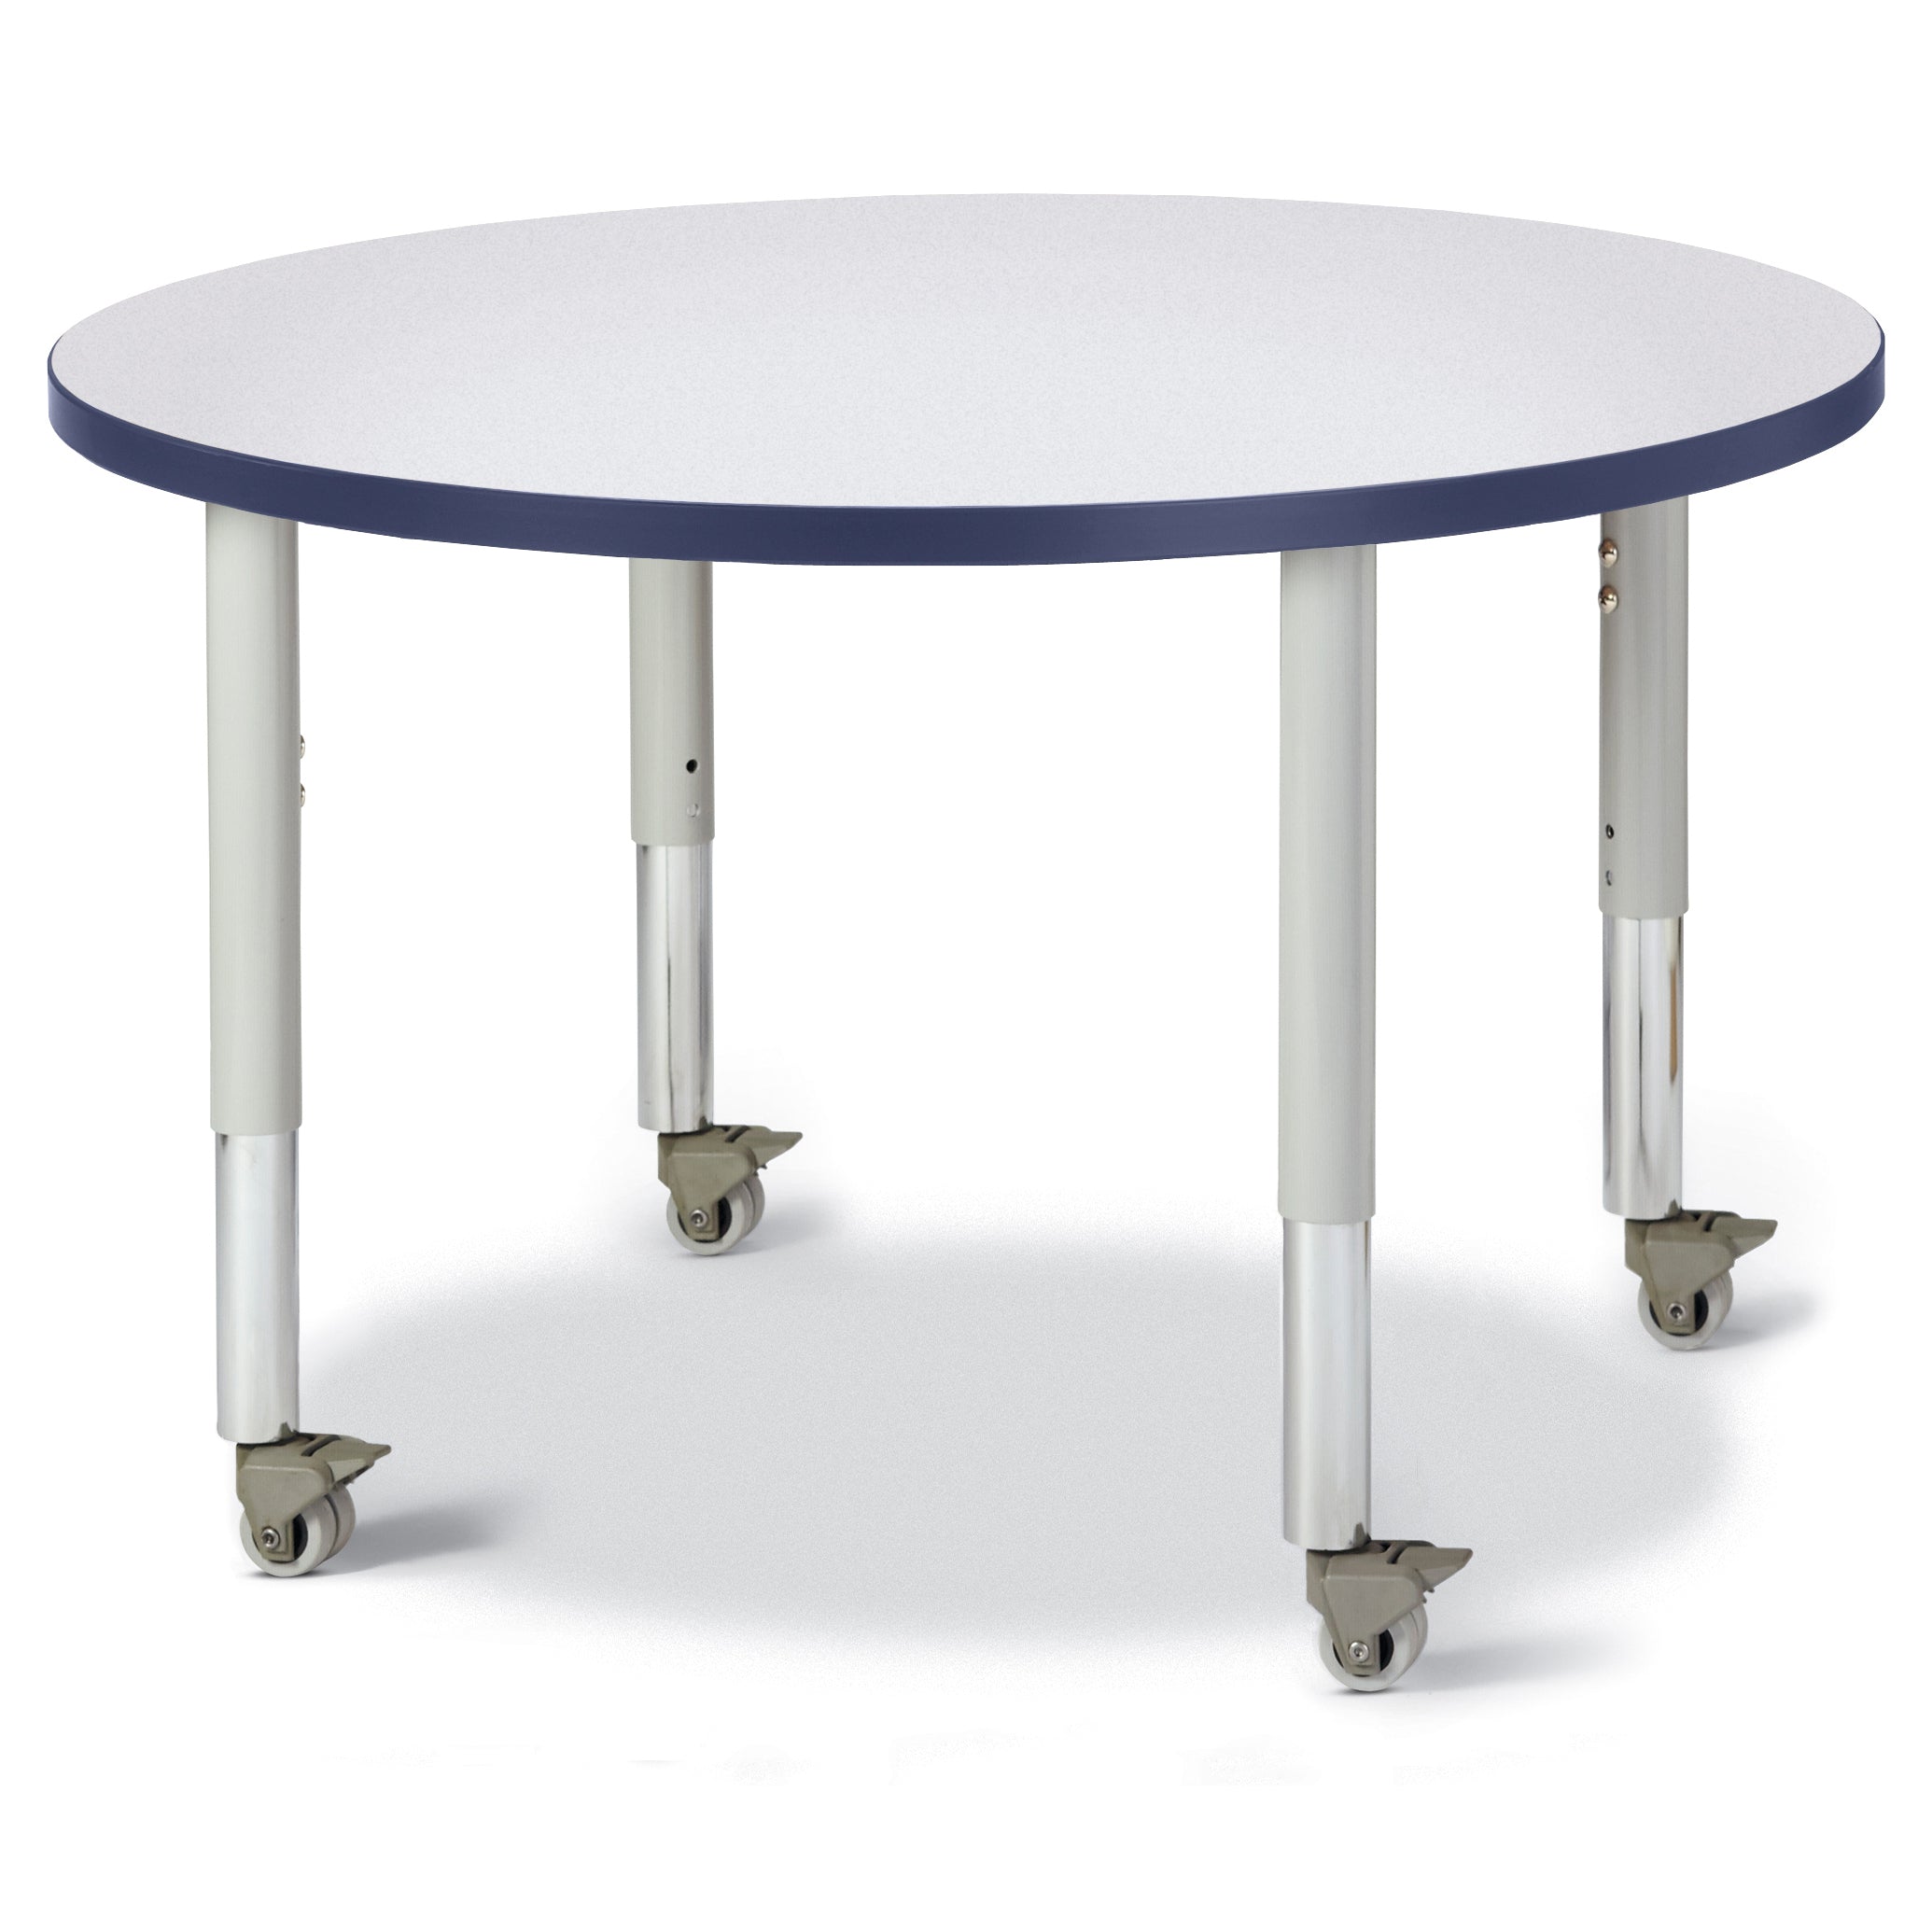 6488JCM112, Berries Round Activity Table - 36" Diameter, Mobile - Freckled Gray/Navy/Gray